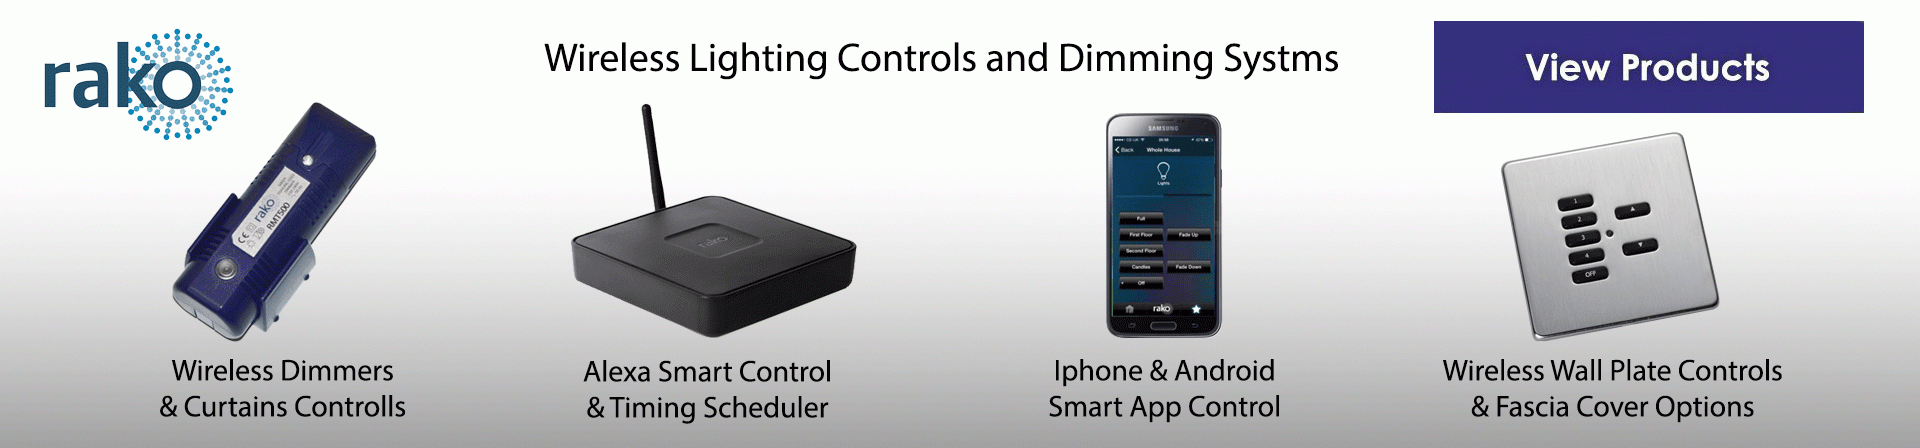 Rako Smart Wireless Lighting Control Systems and Solutions